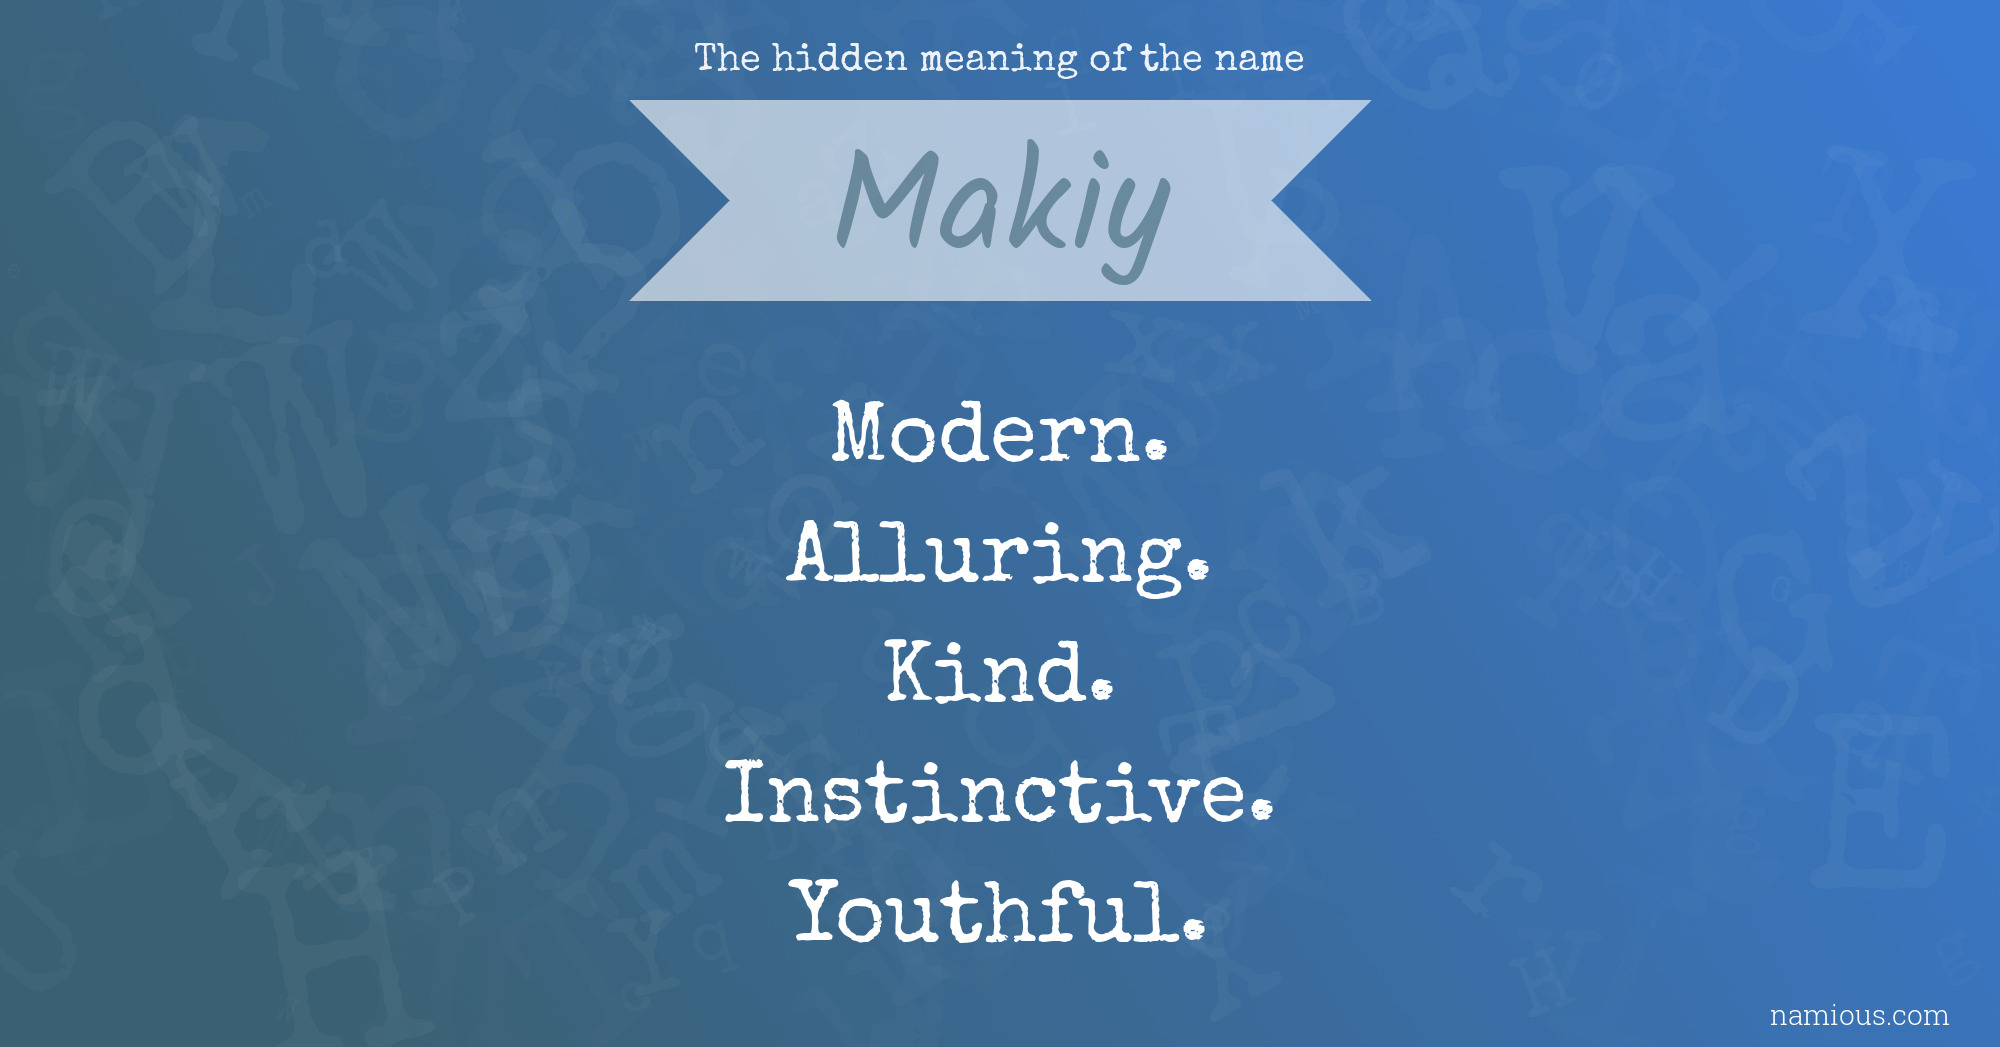 The hidden meaning of the name Makiy